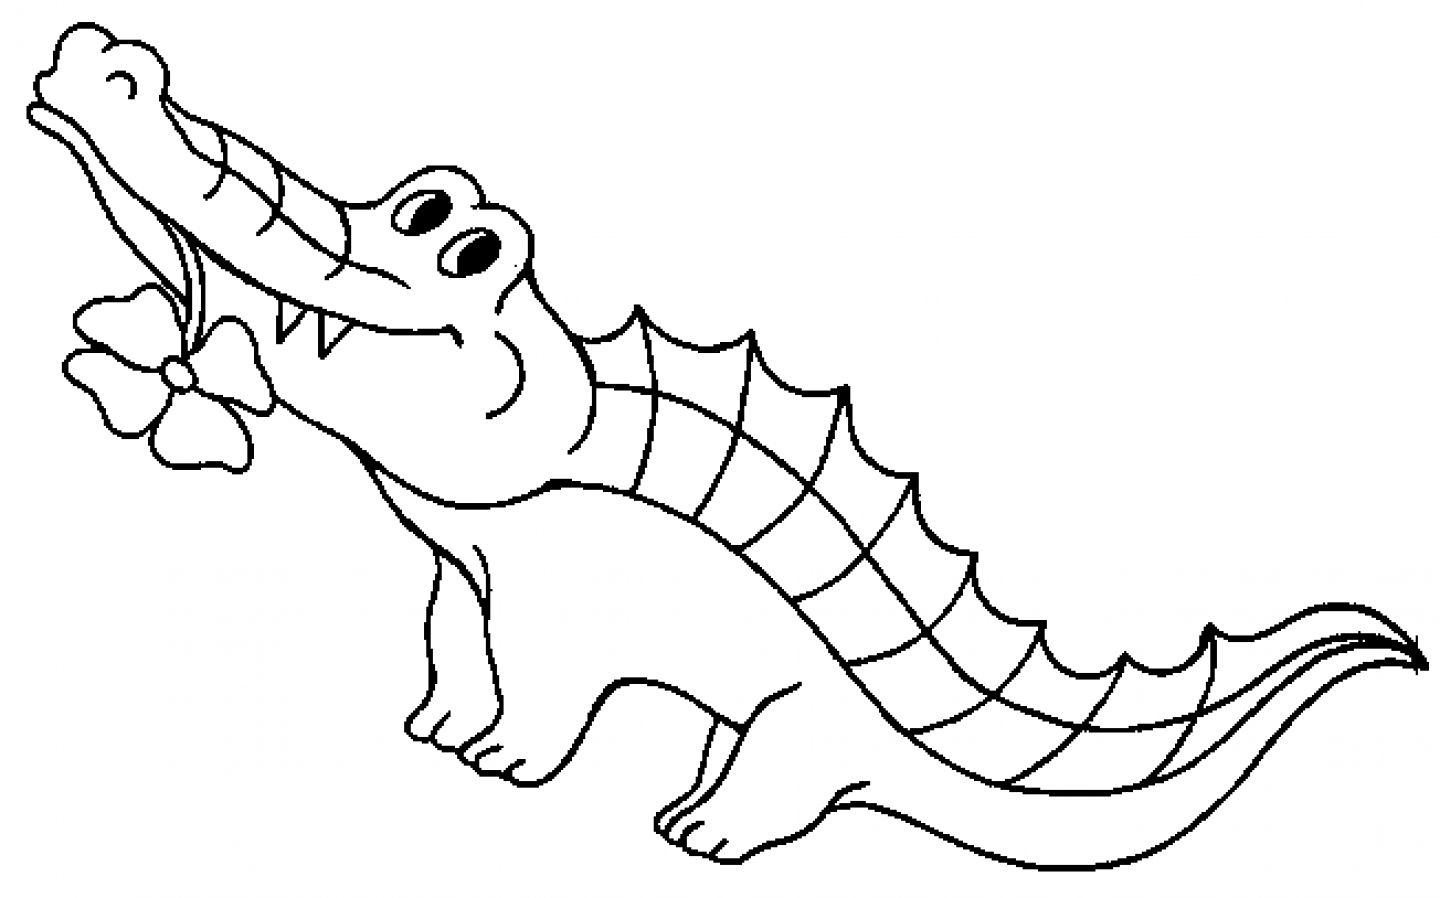 crocodile-coloring-page | Free Coloring Pages on Masivy World